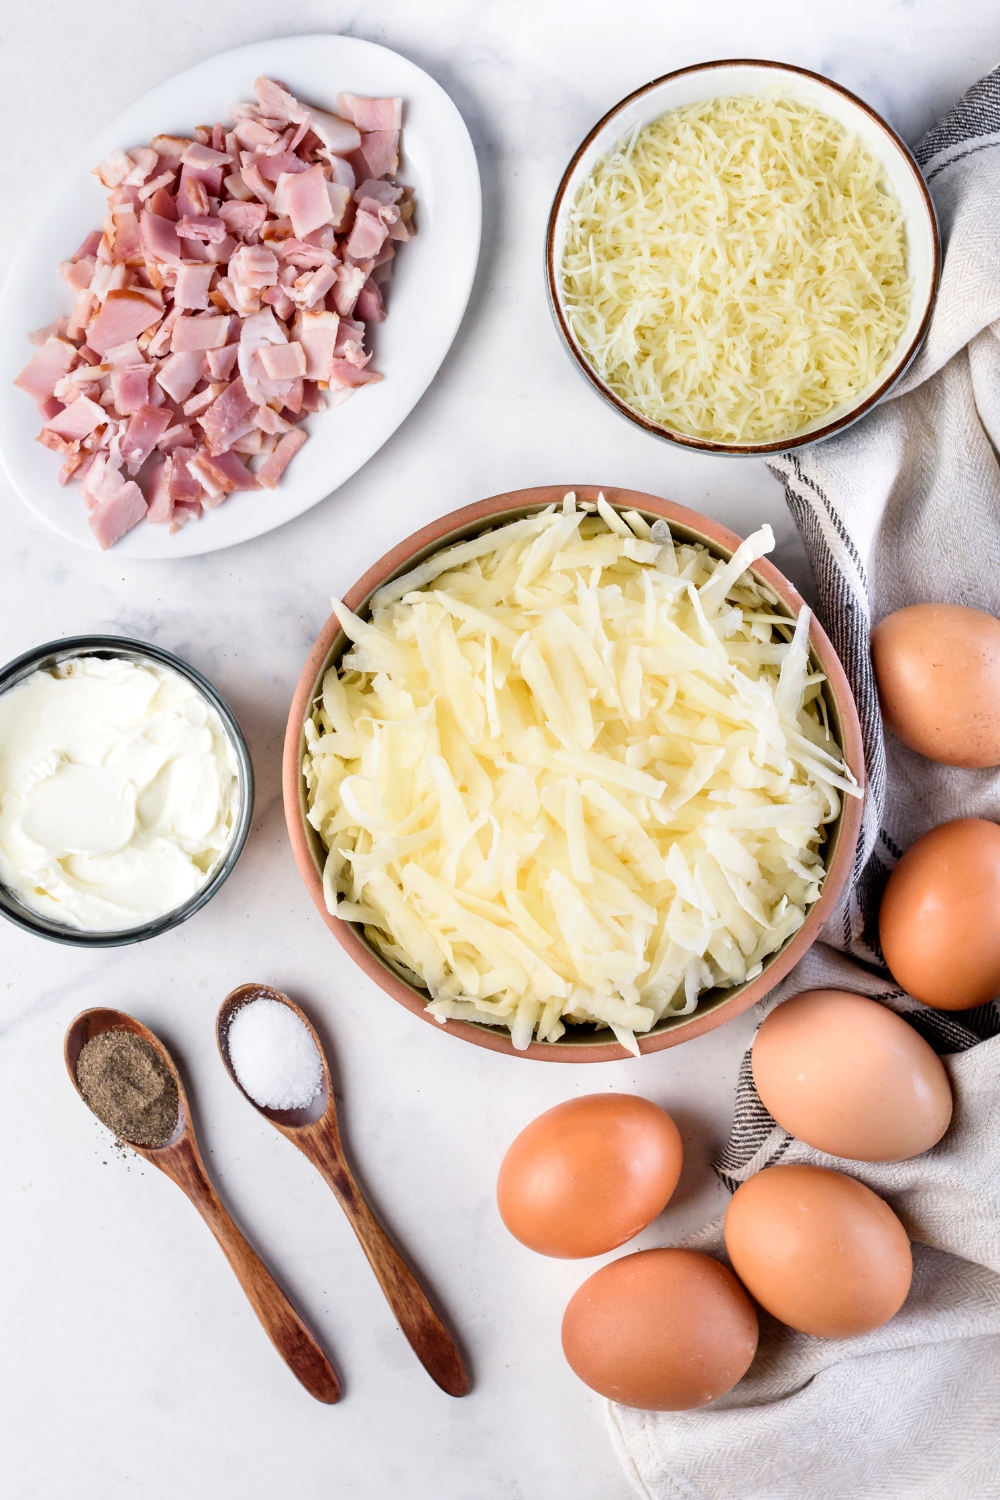 An assortment of ingredients including raw eggs, two spoonfuls of salt and pepper, a plate of diced bacon, and bowls of hash browns, shredded cheese, and cream cheese.